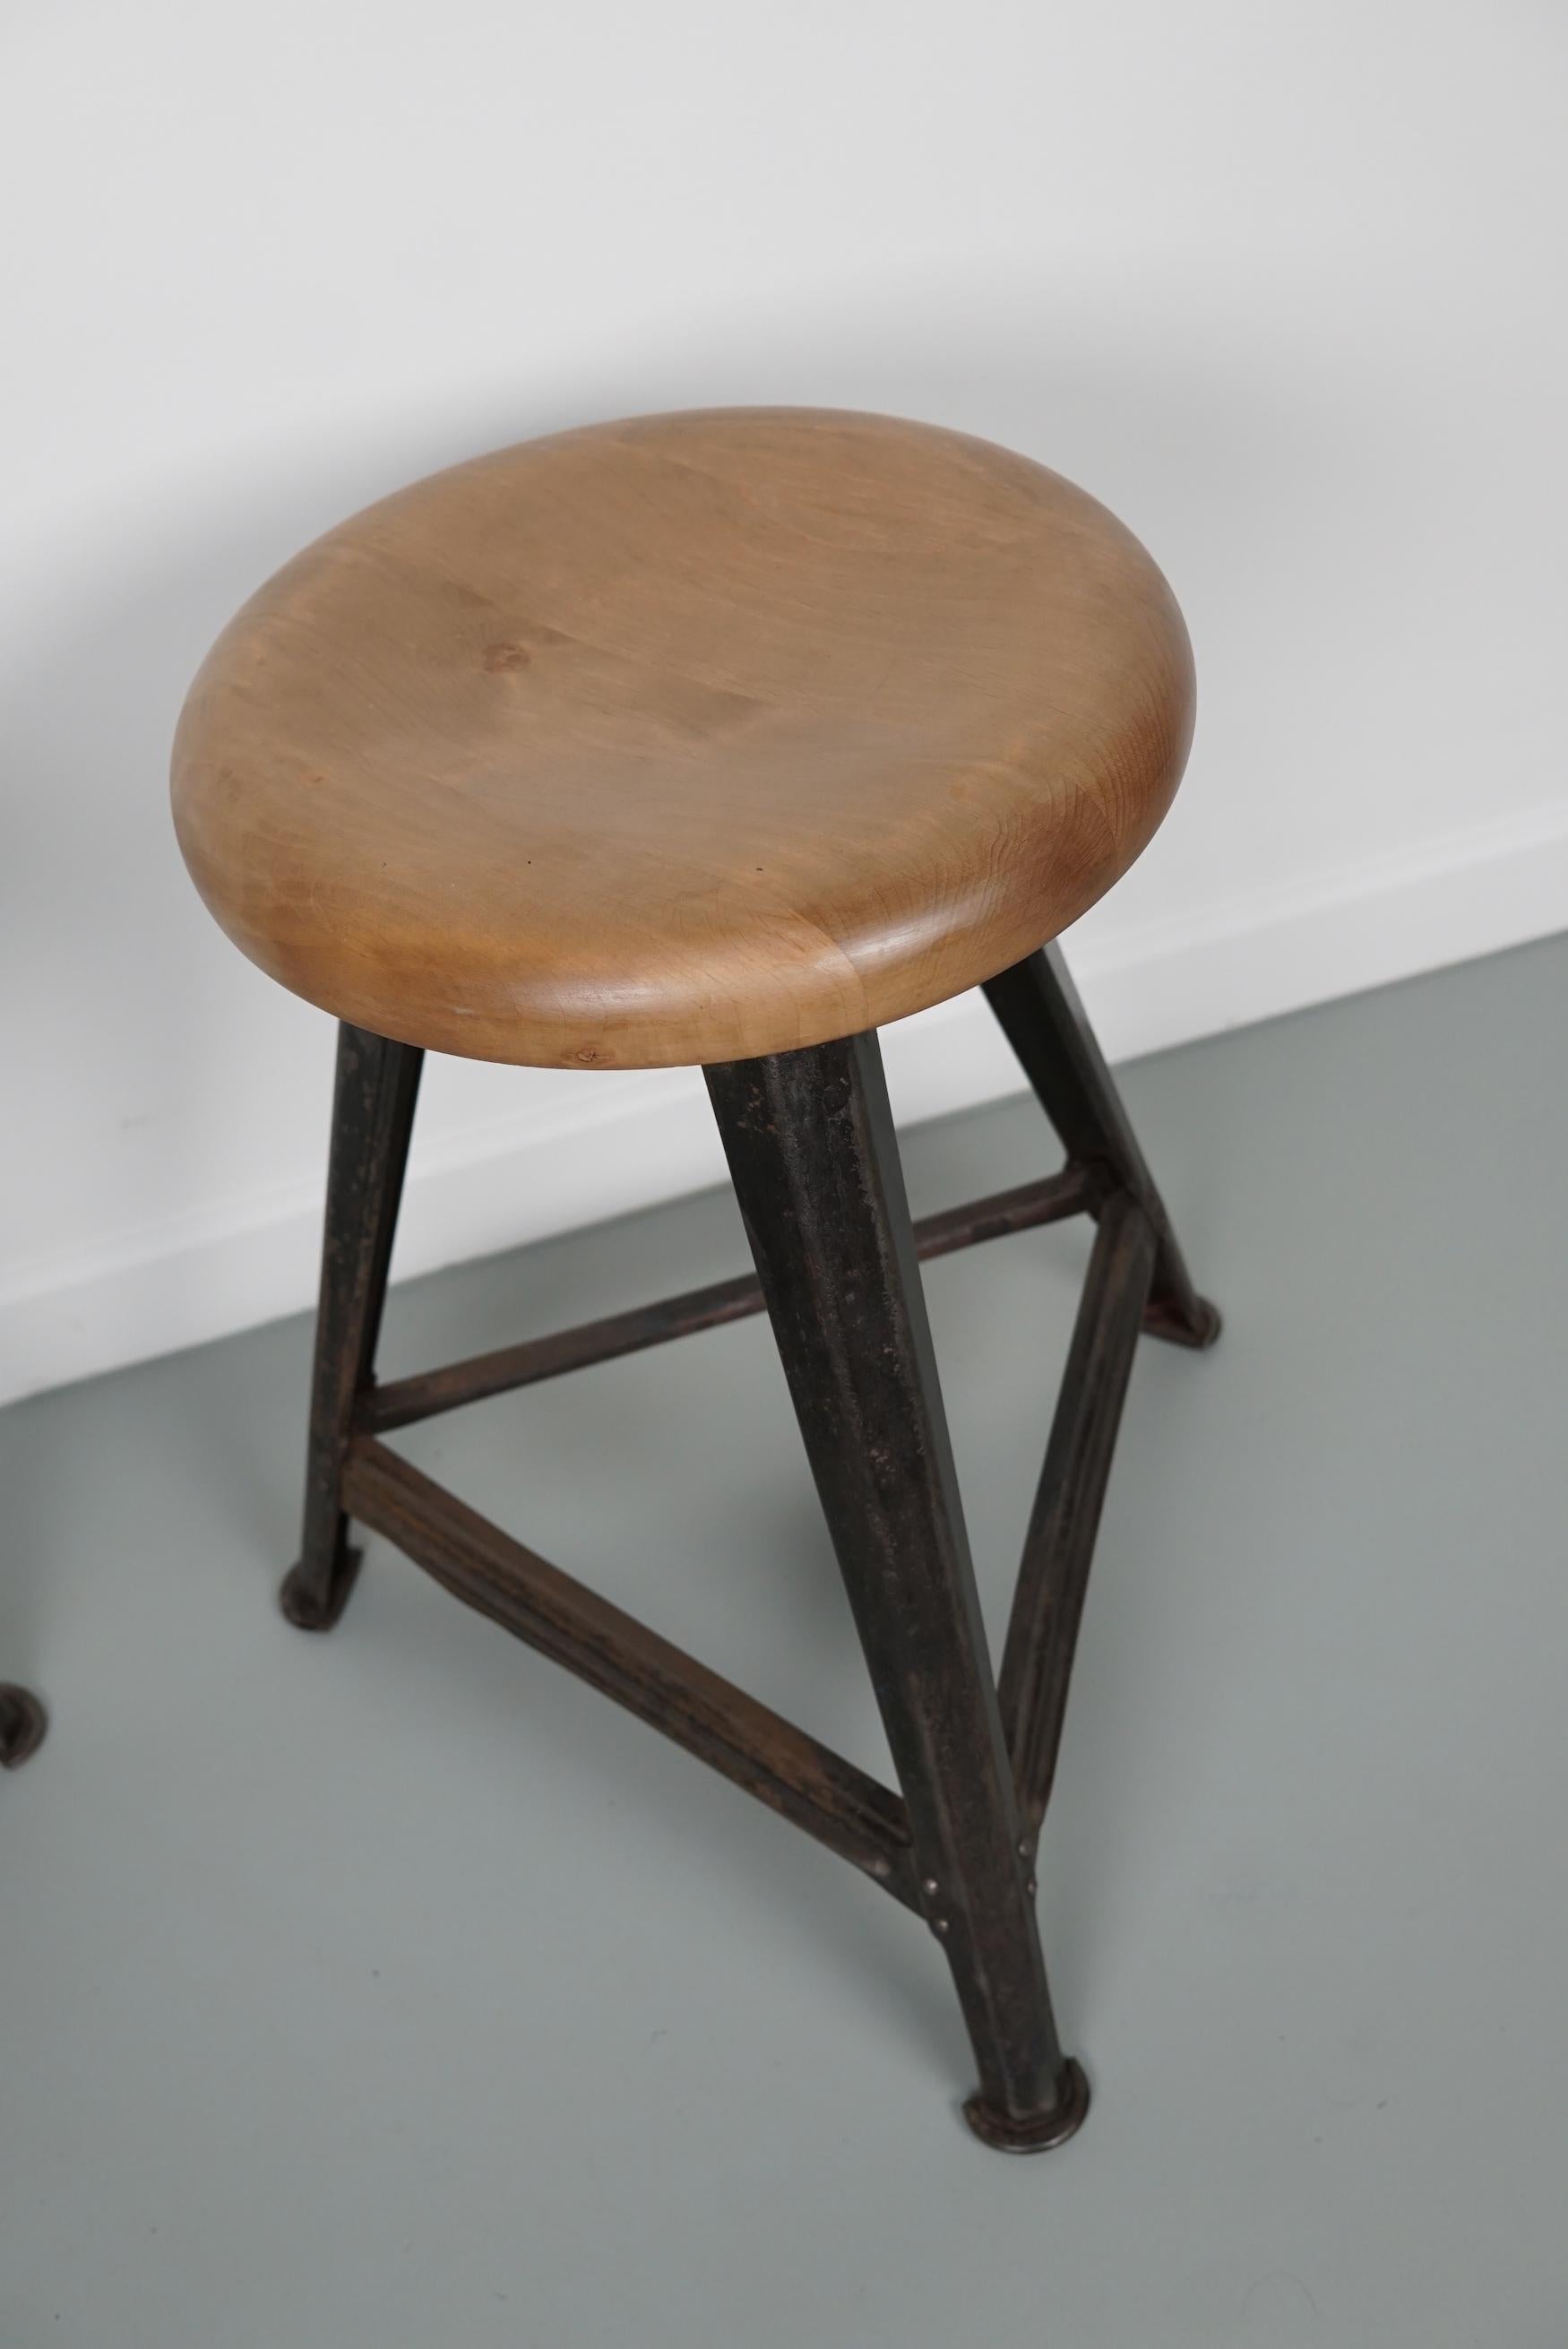 This pair of stools were designed by Robert Wagner and made by Rowac in the 1930s. They feature a steel frame, a wooden seat and Rowac stamp with number 37 underneath the seat. They remain in a good and stable condition with signs of age and use in